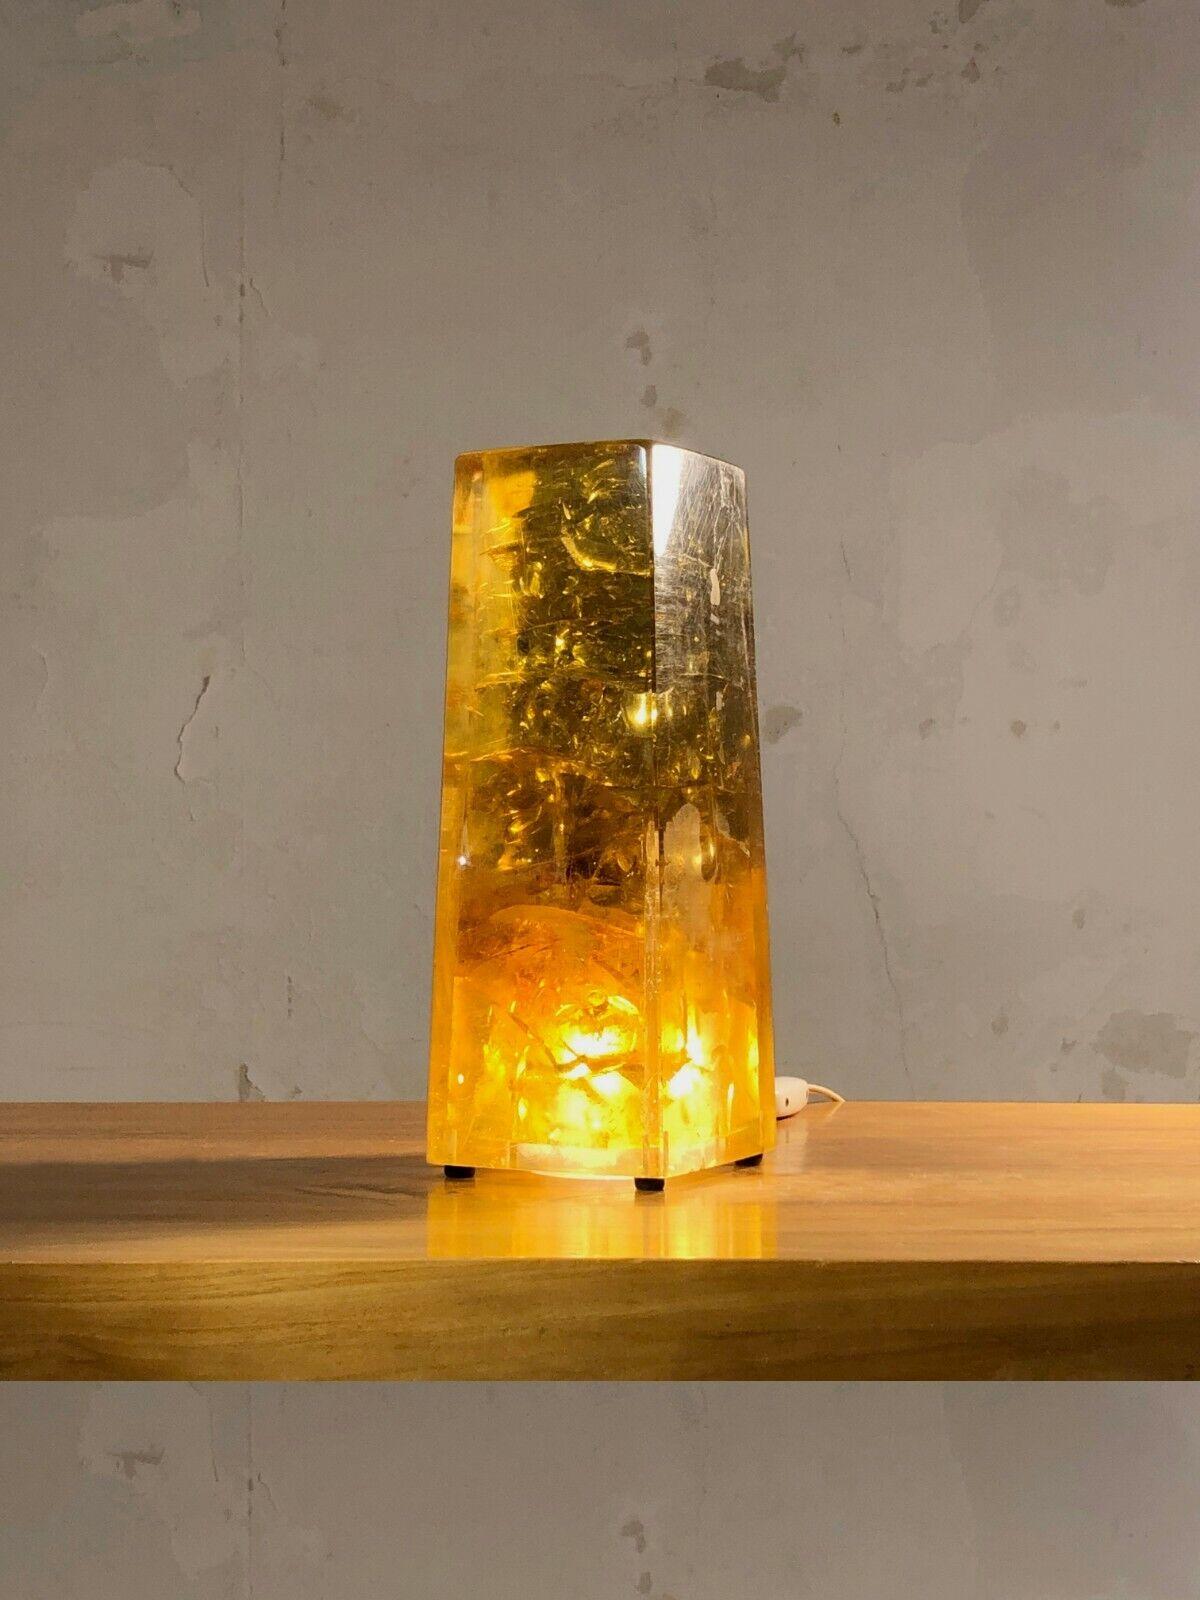 DESCRIPTION: An exceptional and sculptural monolythic table lamp or night light, Post-Modernist, Pop, Space-Age, in a block of massive yellow amber fractal resin, illuminated transparently by a bulb recessed in the center of the base of the lamp,